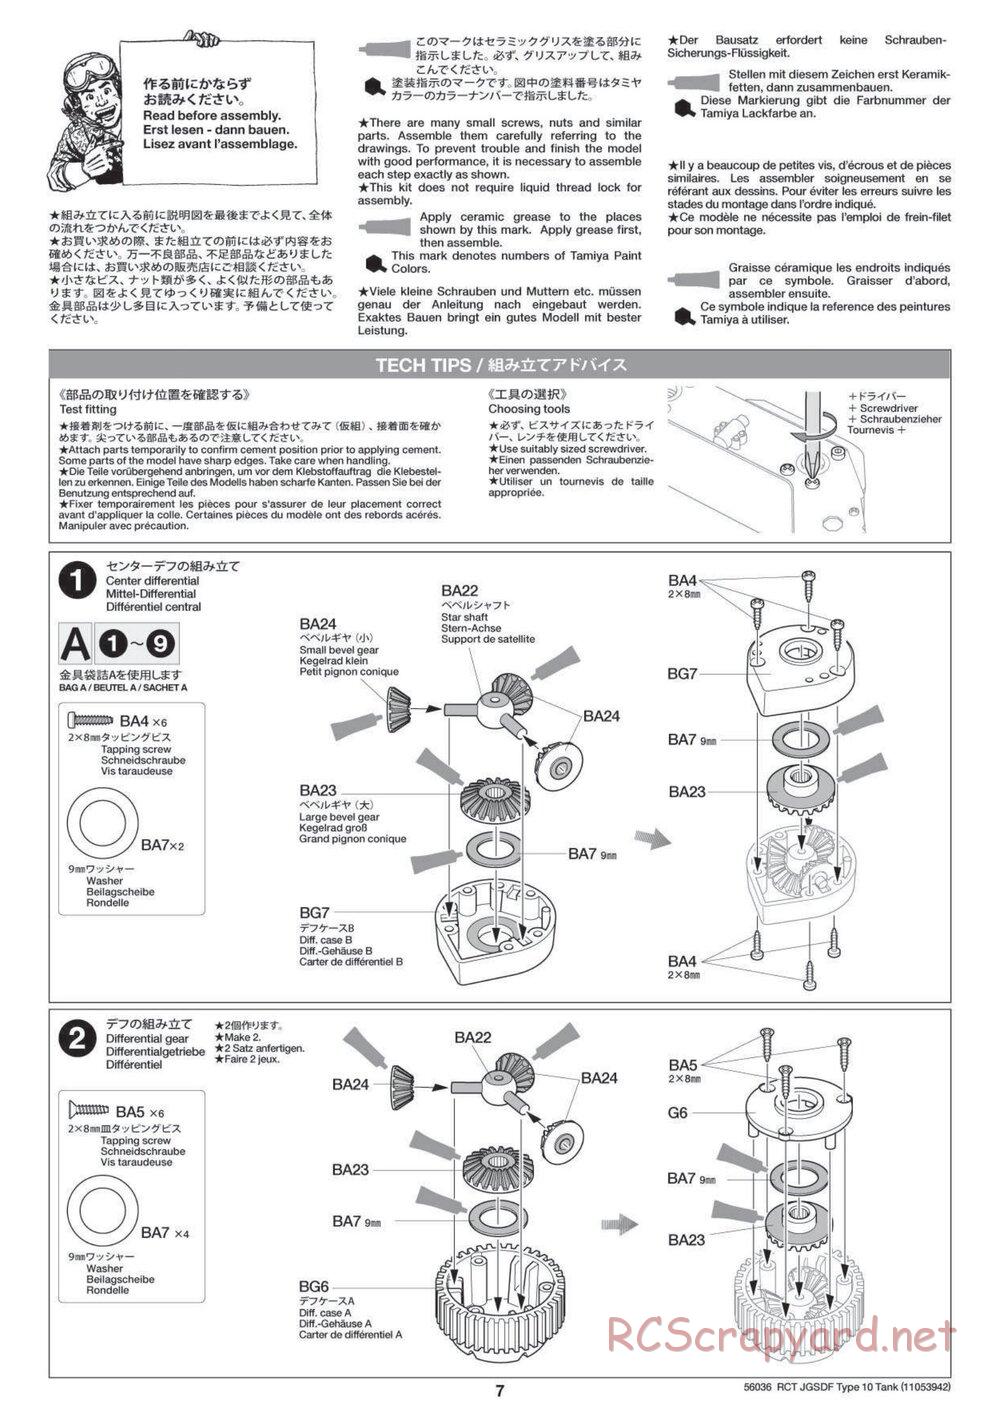 Tamiya - JGSDF Type 10 Tank - 1/16 Scale Chassis - Manual - Page 7